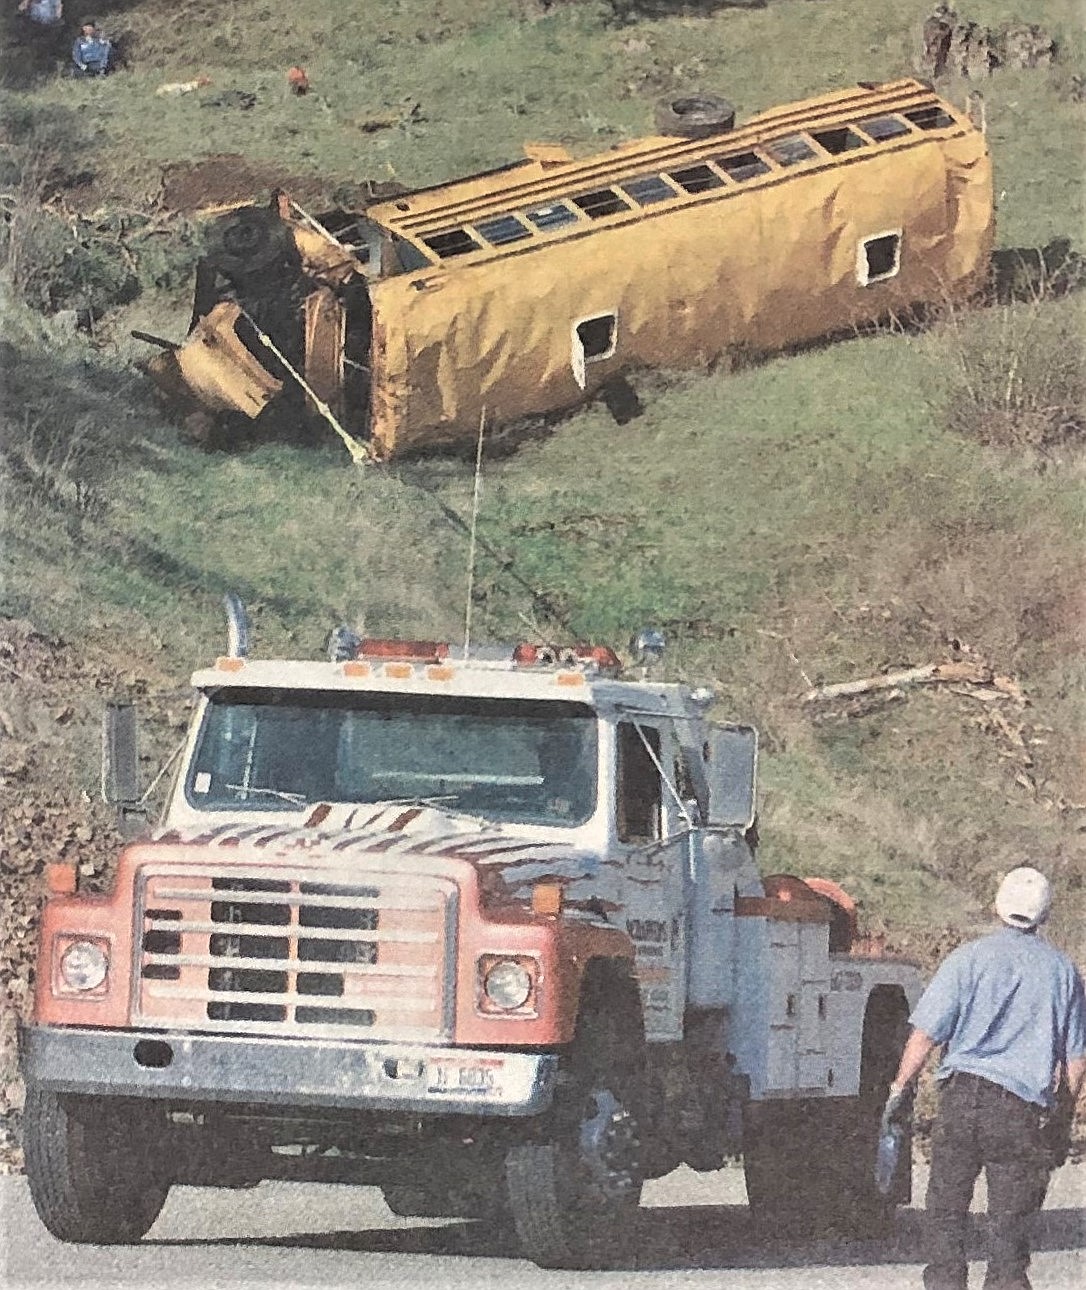 A wrecker removes crashed bus from hillside.